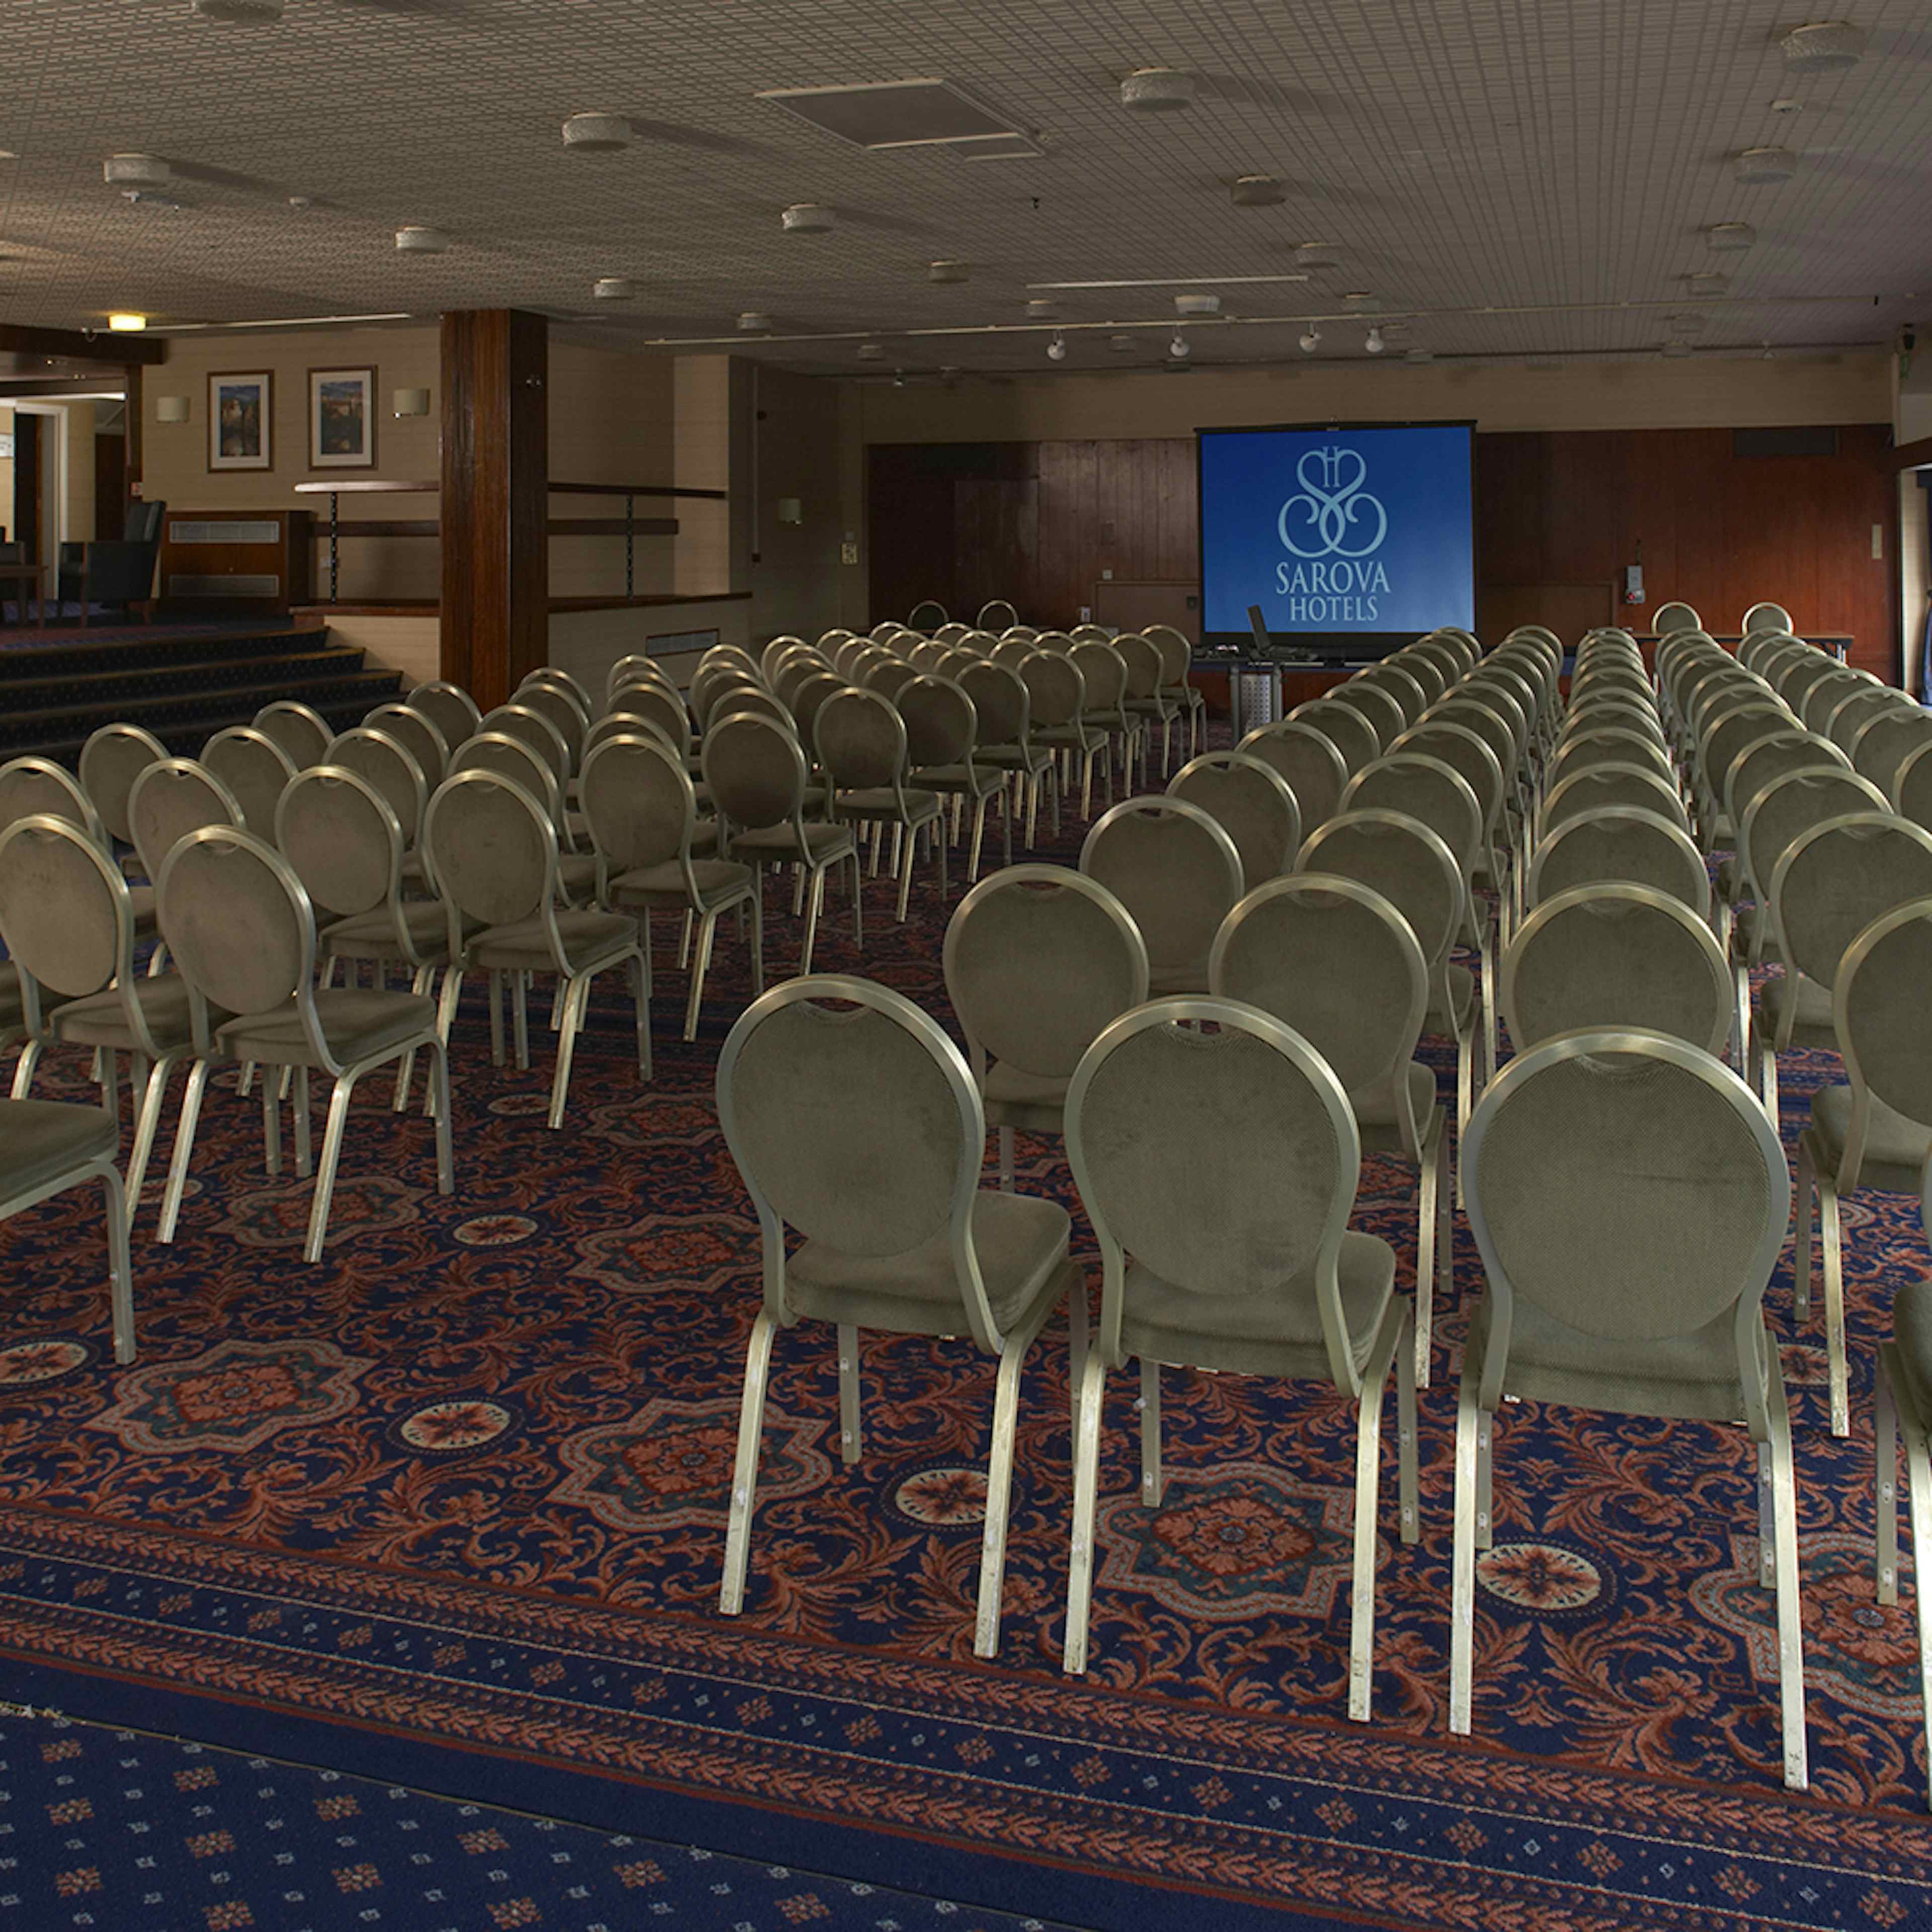 The Abbey Hotel - Elgar Suite image 2